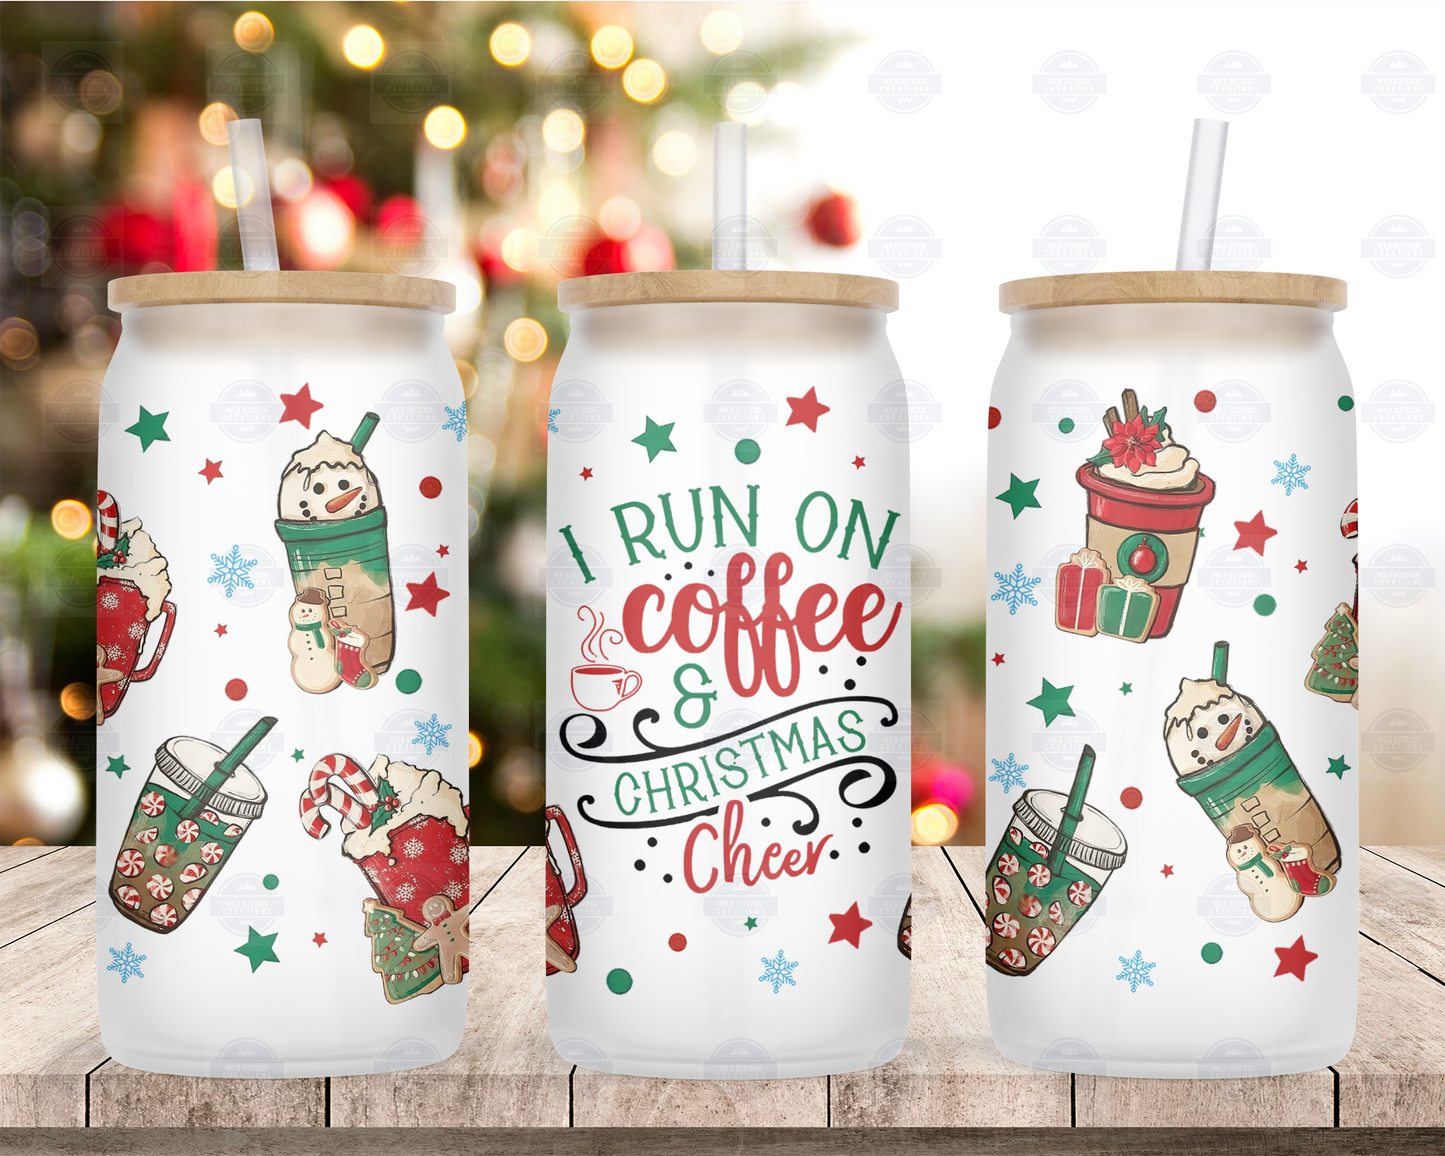 I Run On Coffee & Christmas Cheer 16oz Frosted Glass Tumbler, Iced Coffee Glass Can